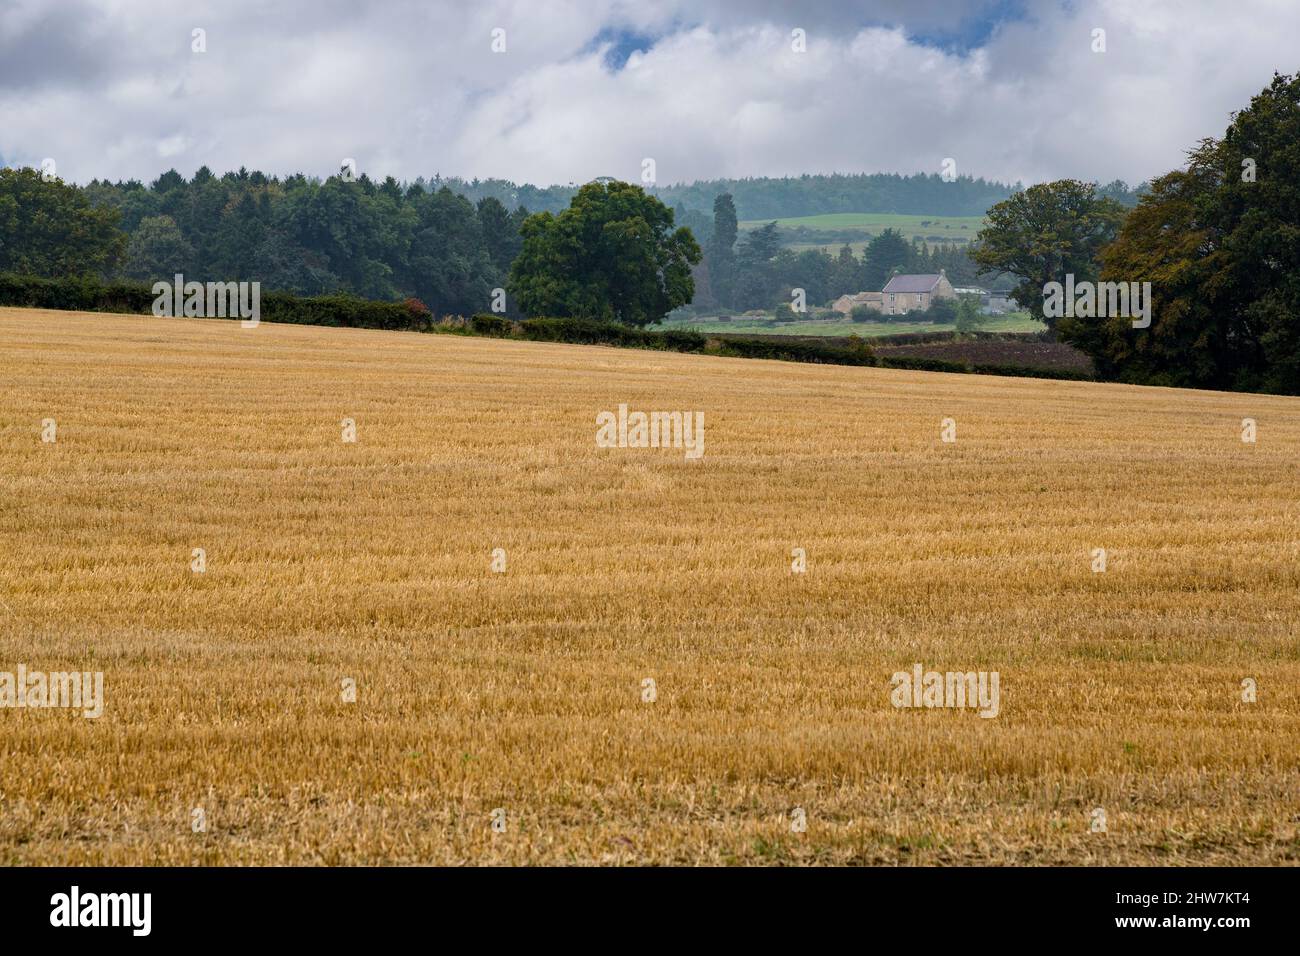 UK, England, Yorkshire.  Scenic Farmland, House in Distance. Stock Photo